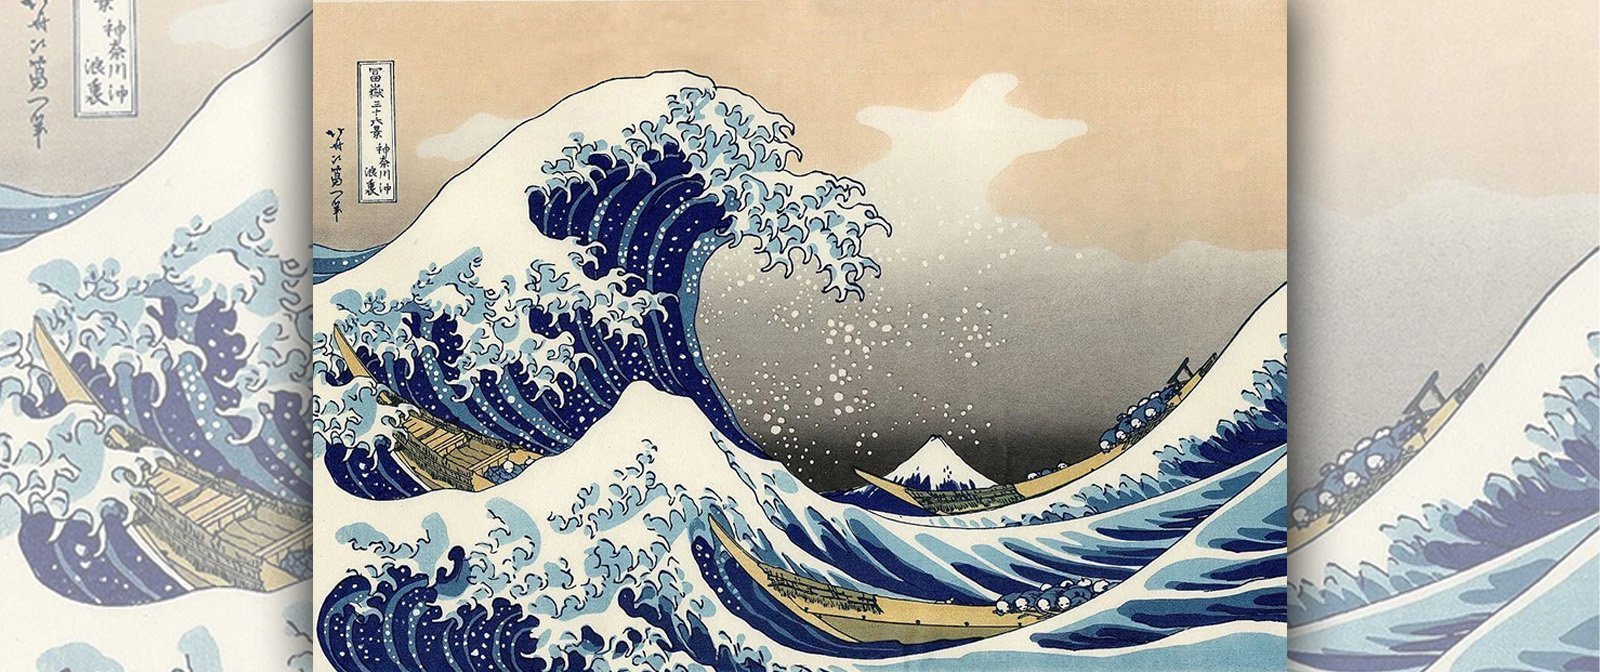 Japanese artist who painted an engraving that shocked Europeans. Hokusai's 